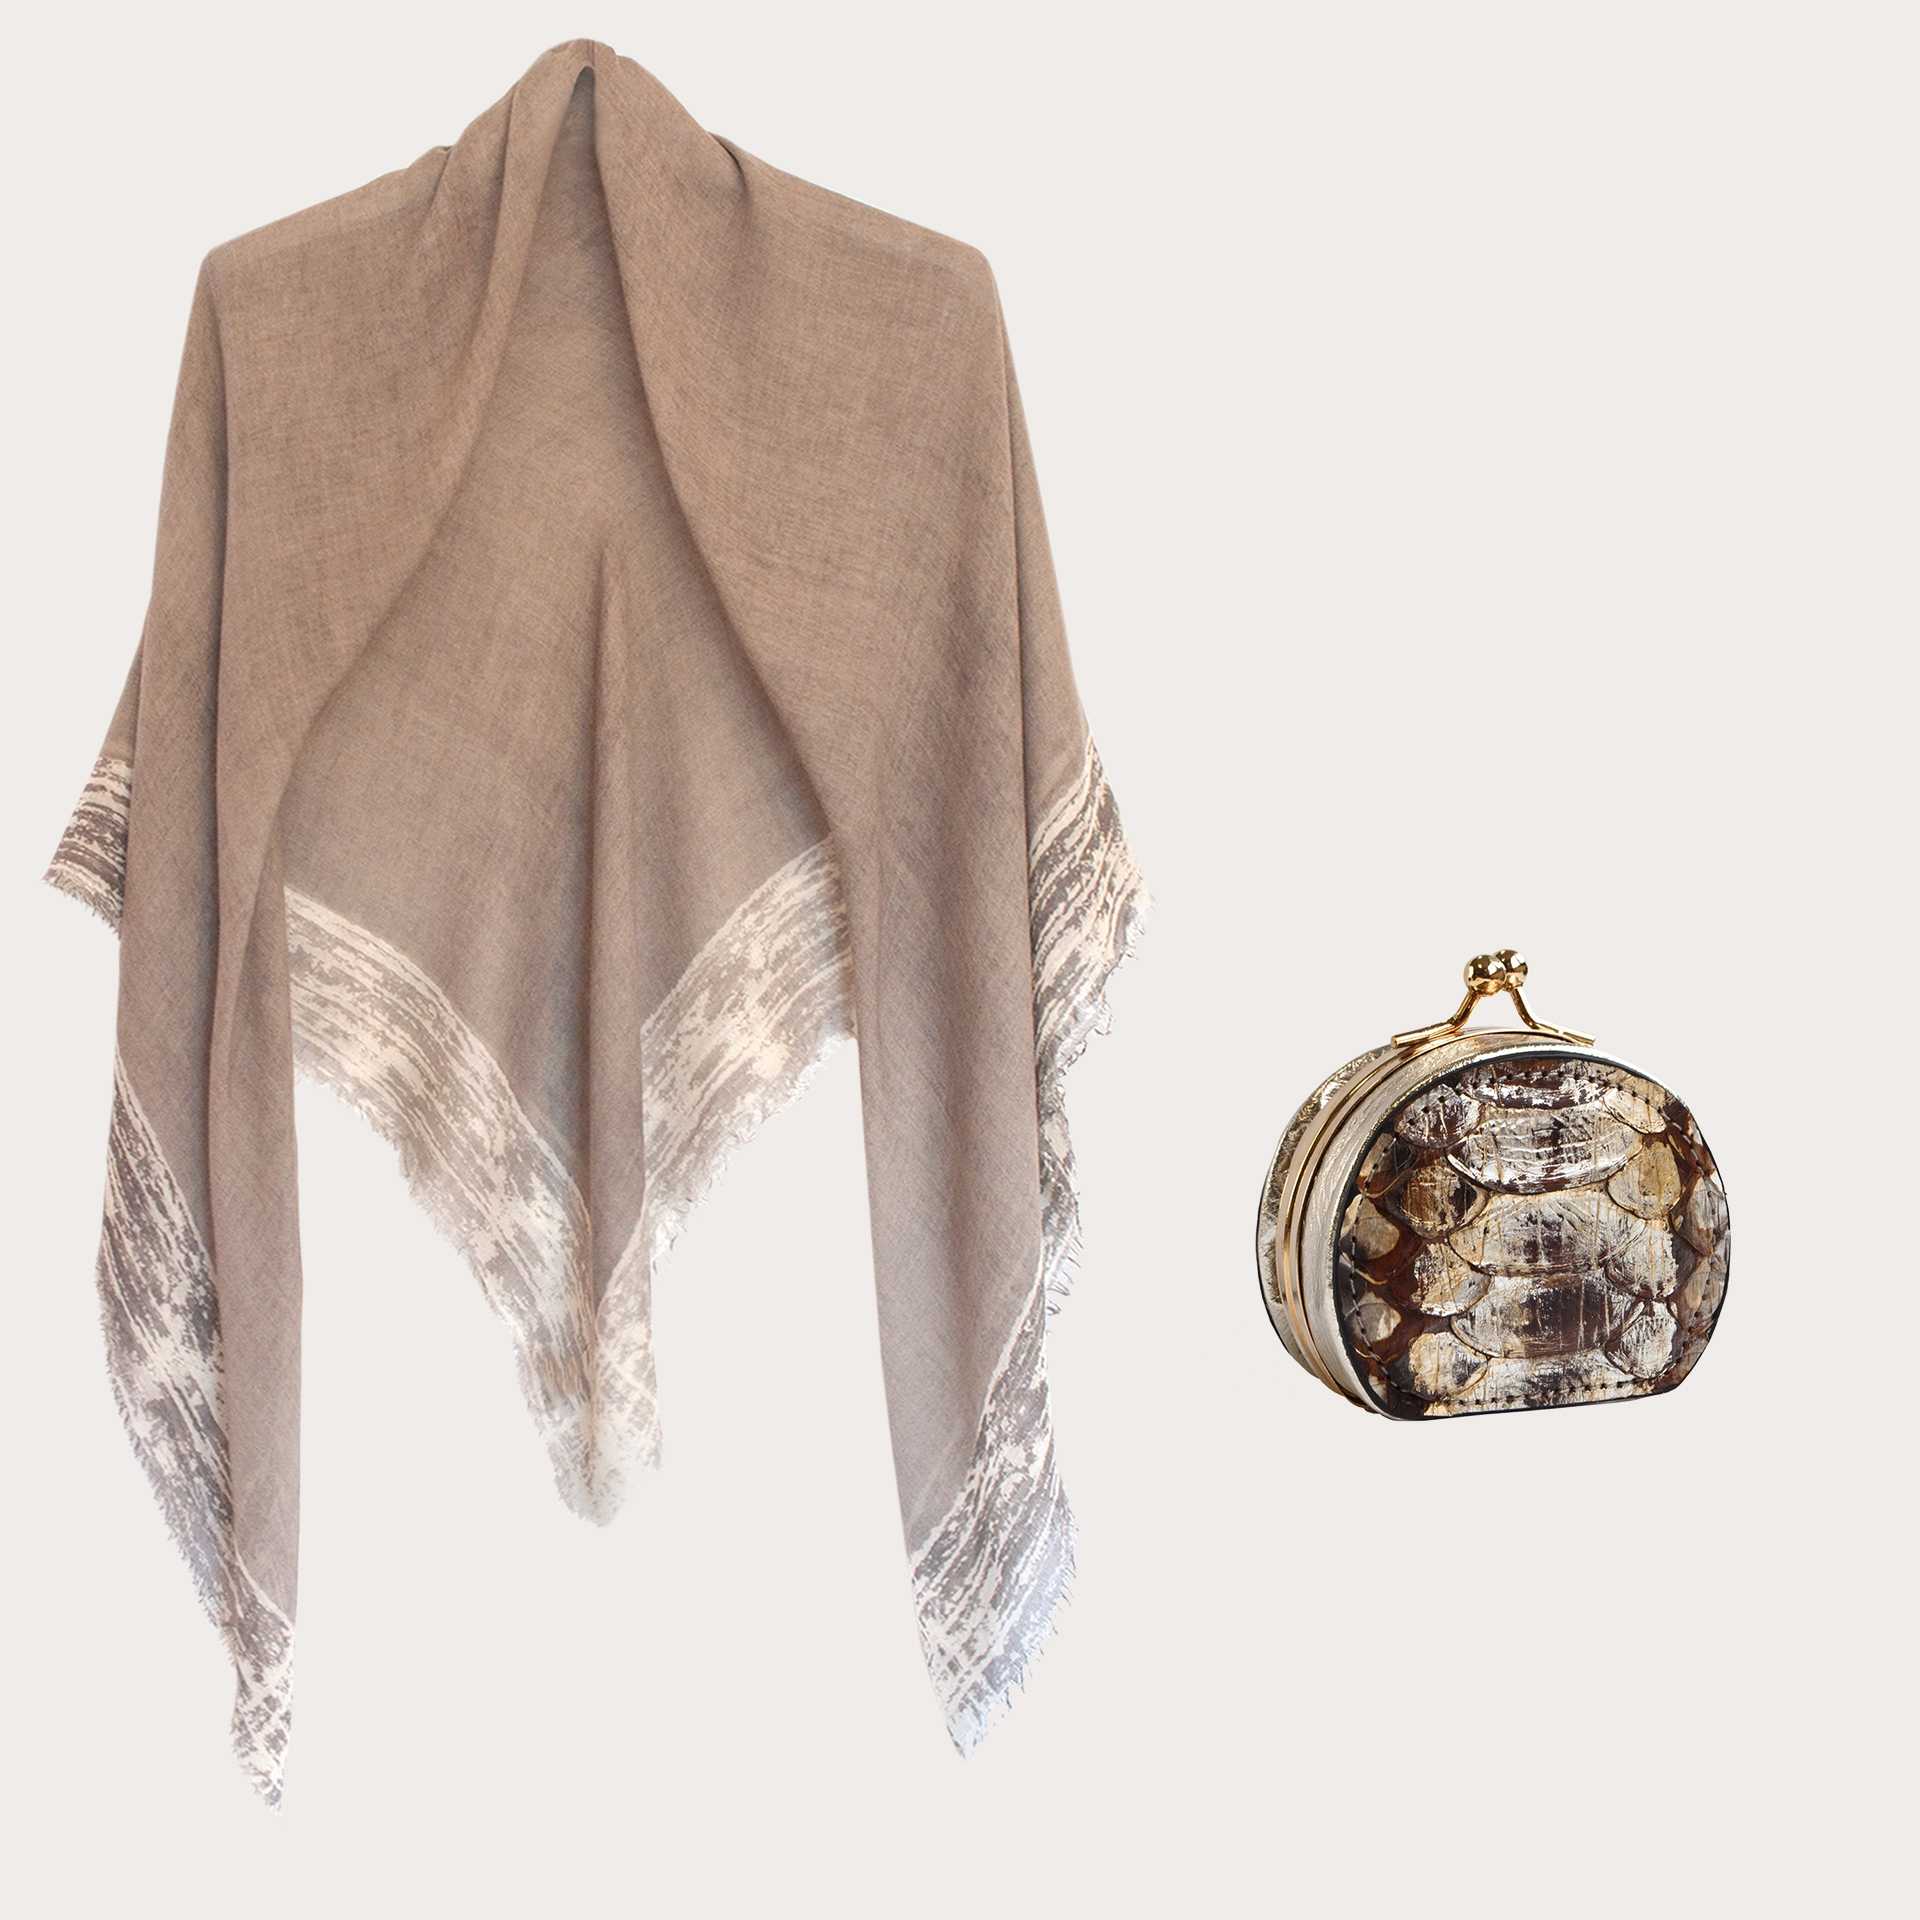 BRUCLE "Golden Wonders" Christmas set, beige stole and purse in brown and gold python